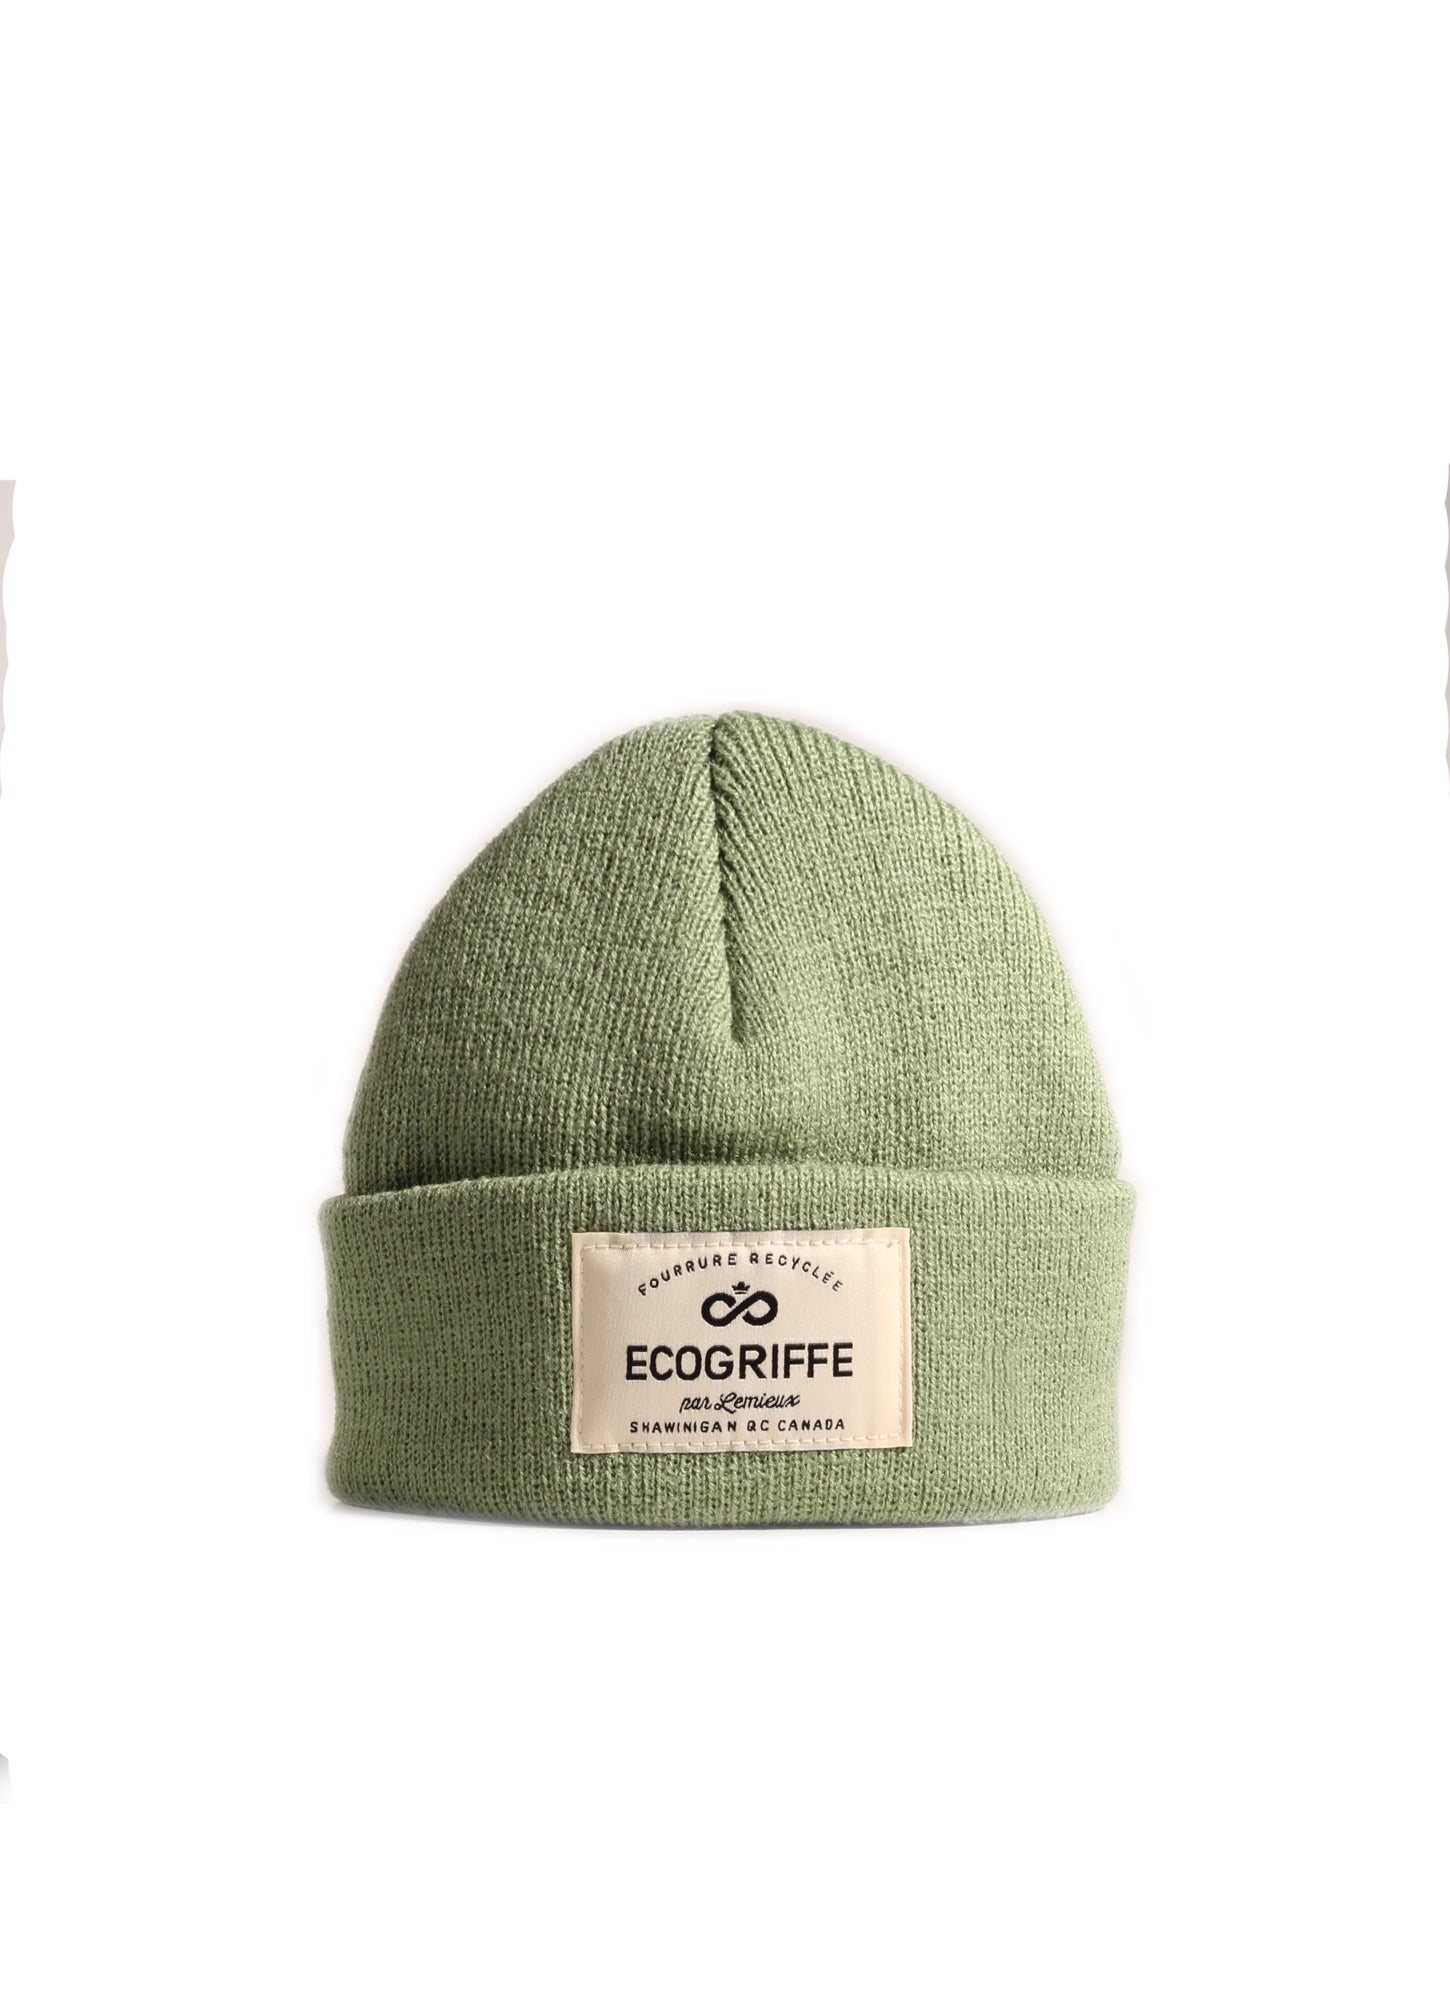 Ecogriffe - Tuque menthe Tradition